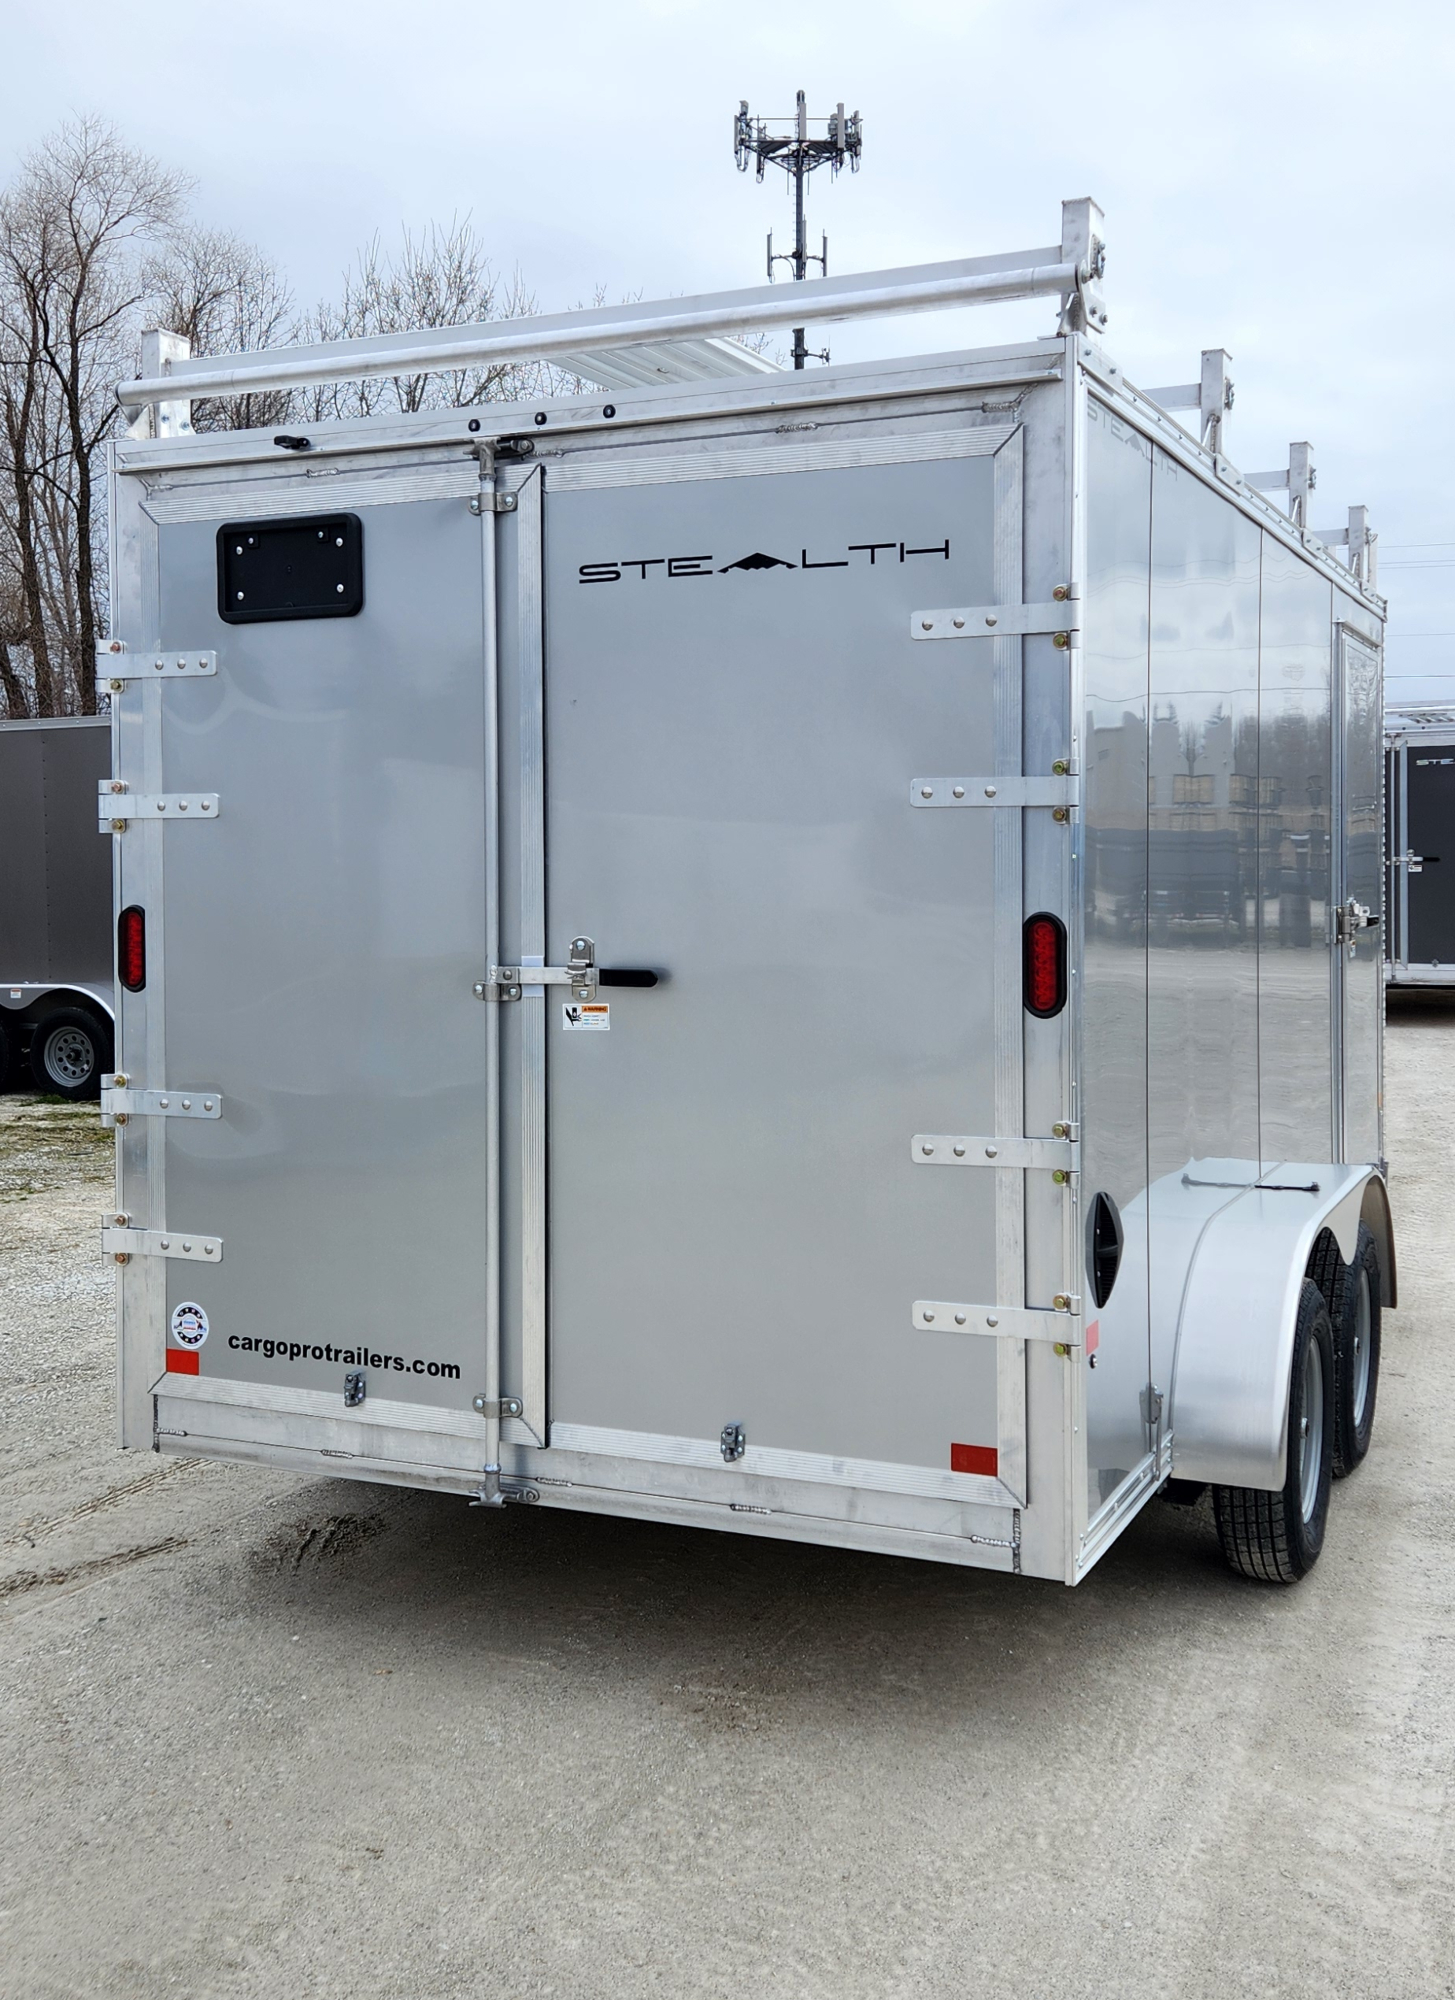 CargoPro Stealth 7 X 14 Aluminum Frame Tandem Axle Ultimate Contractor Cargo Trailer Double Rear Doors, 79 inch Interior Height- Silver